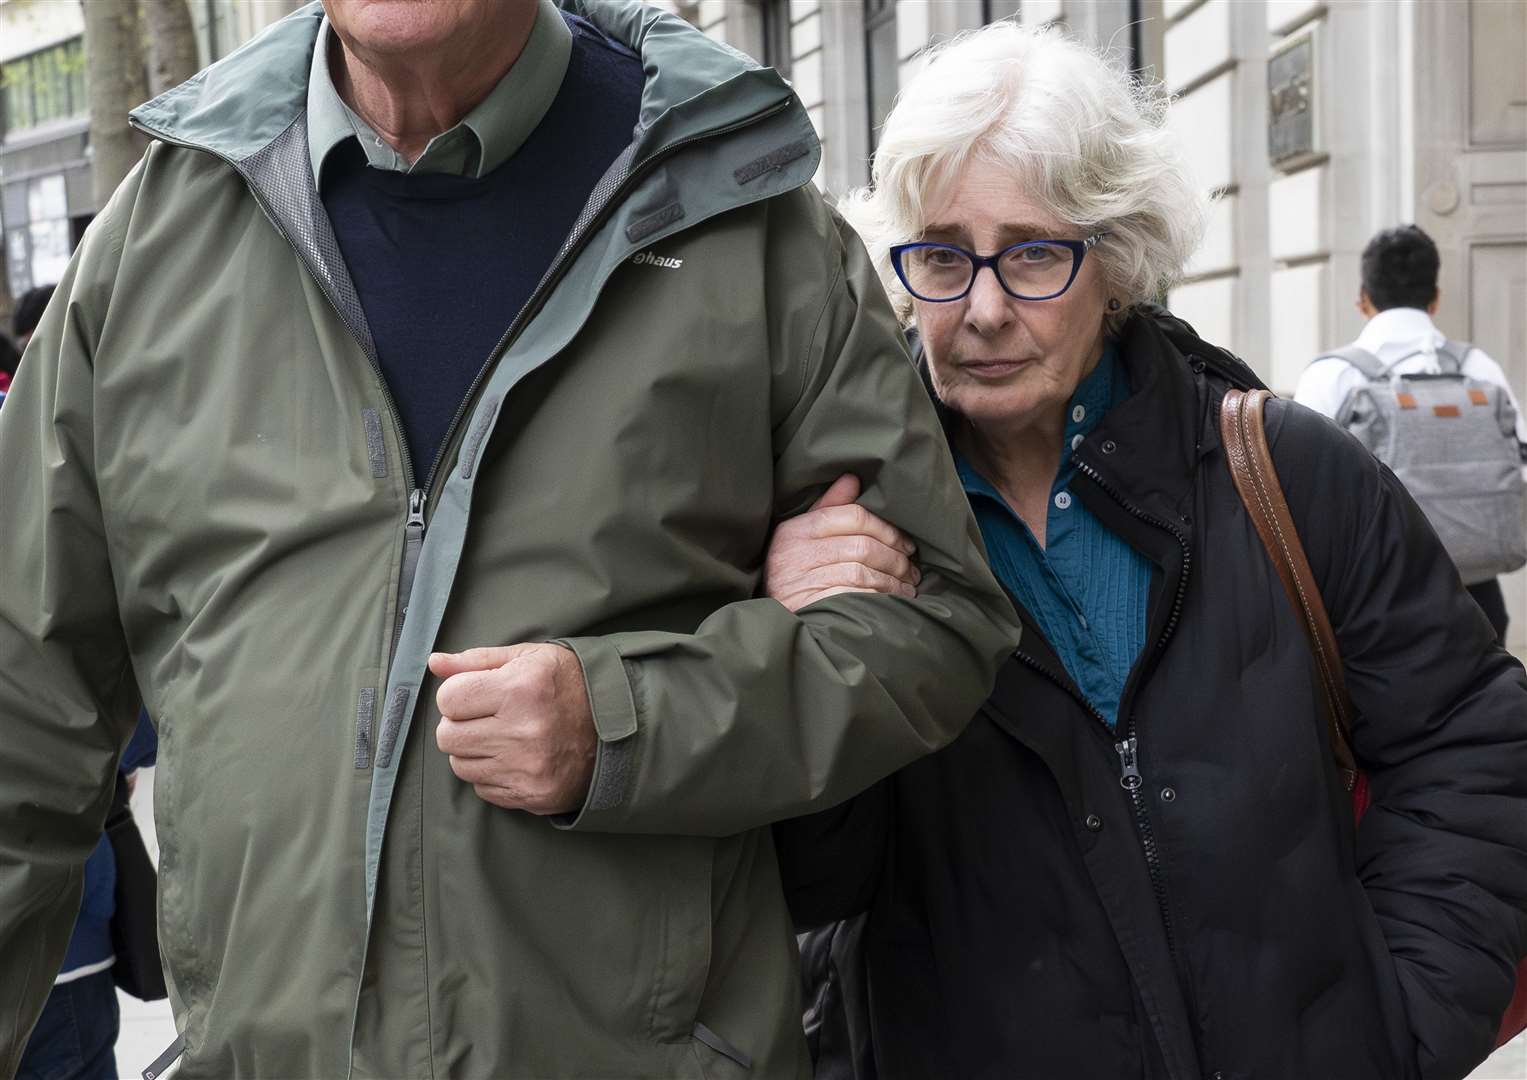 Susan Crichton, former company secretary and general counsel of Post Office Ltd, leaves after giving evidence to the inquiry at Aldwych House, central London (Jeff Moore/PA)